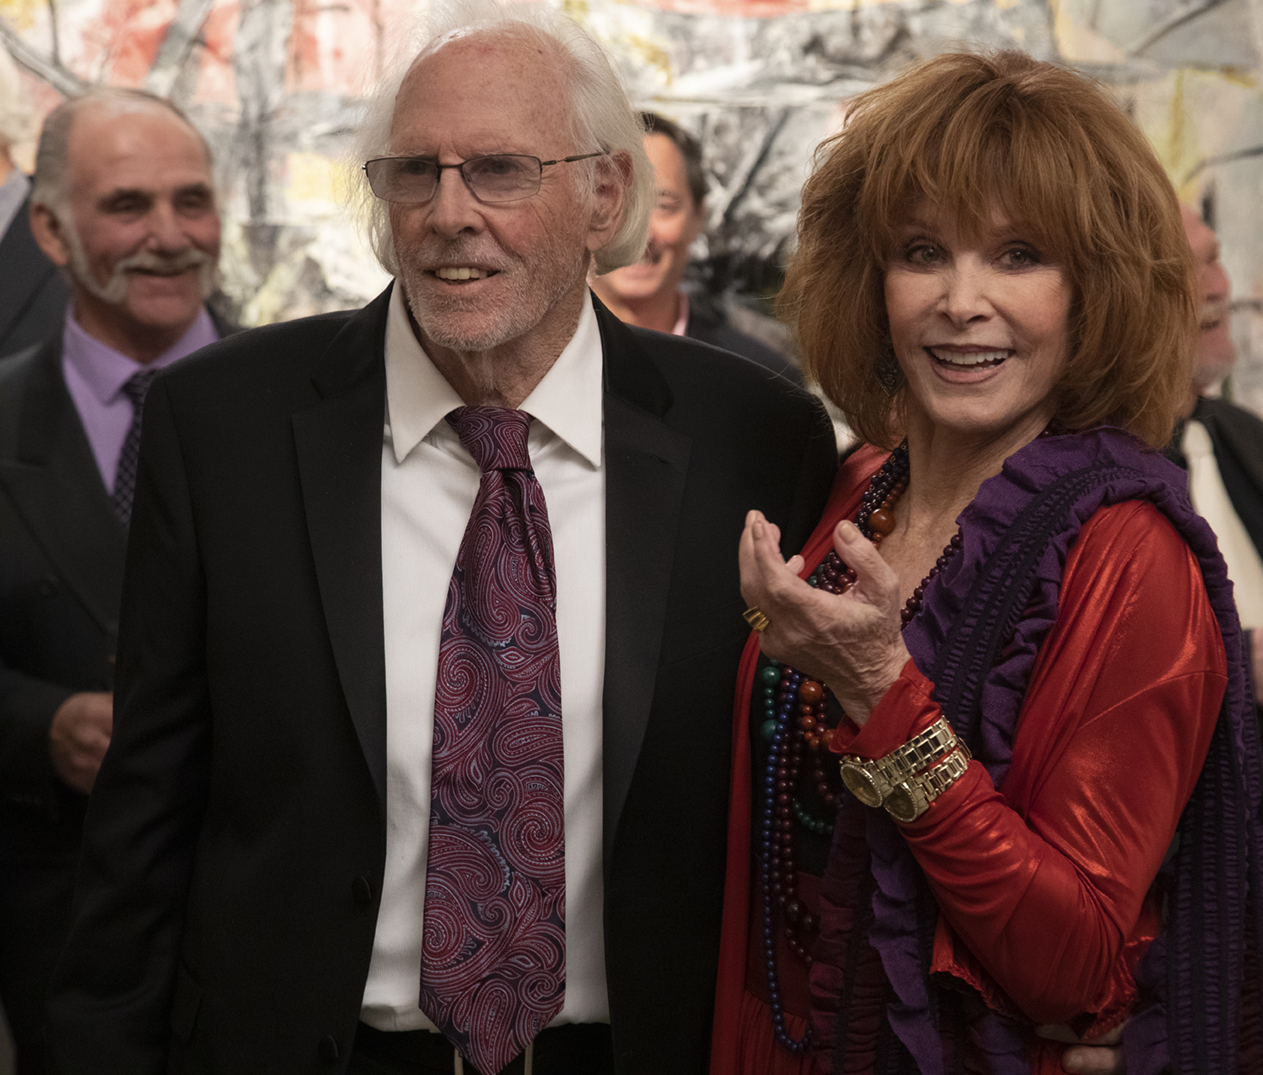 Richard (Bruce Dern) and Adaa Risi (Stefanie Powers) catch up over old times at his Manhattan art opening in THE ARTIST’S WIFE. Photo by Michael Lavine.